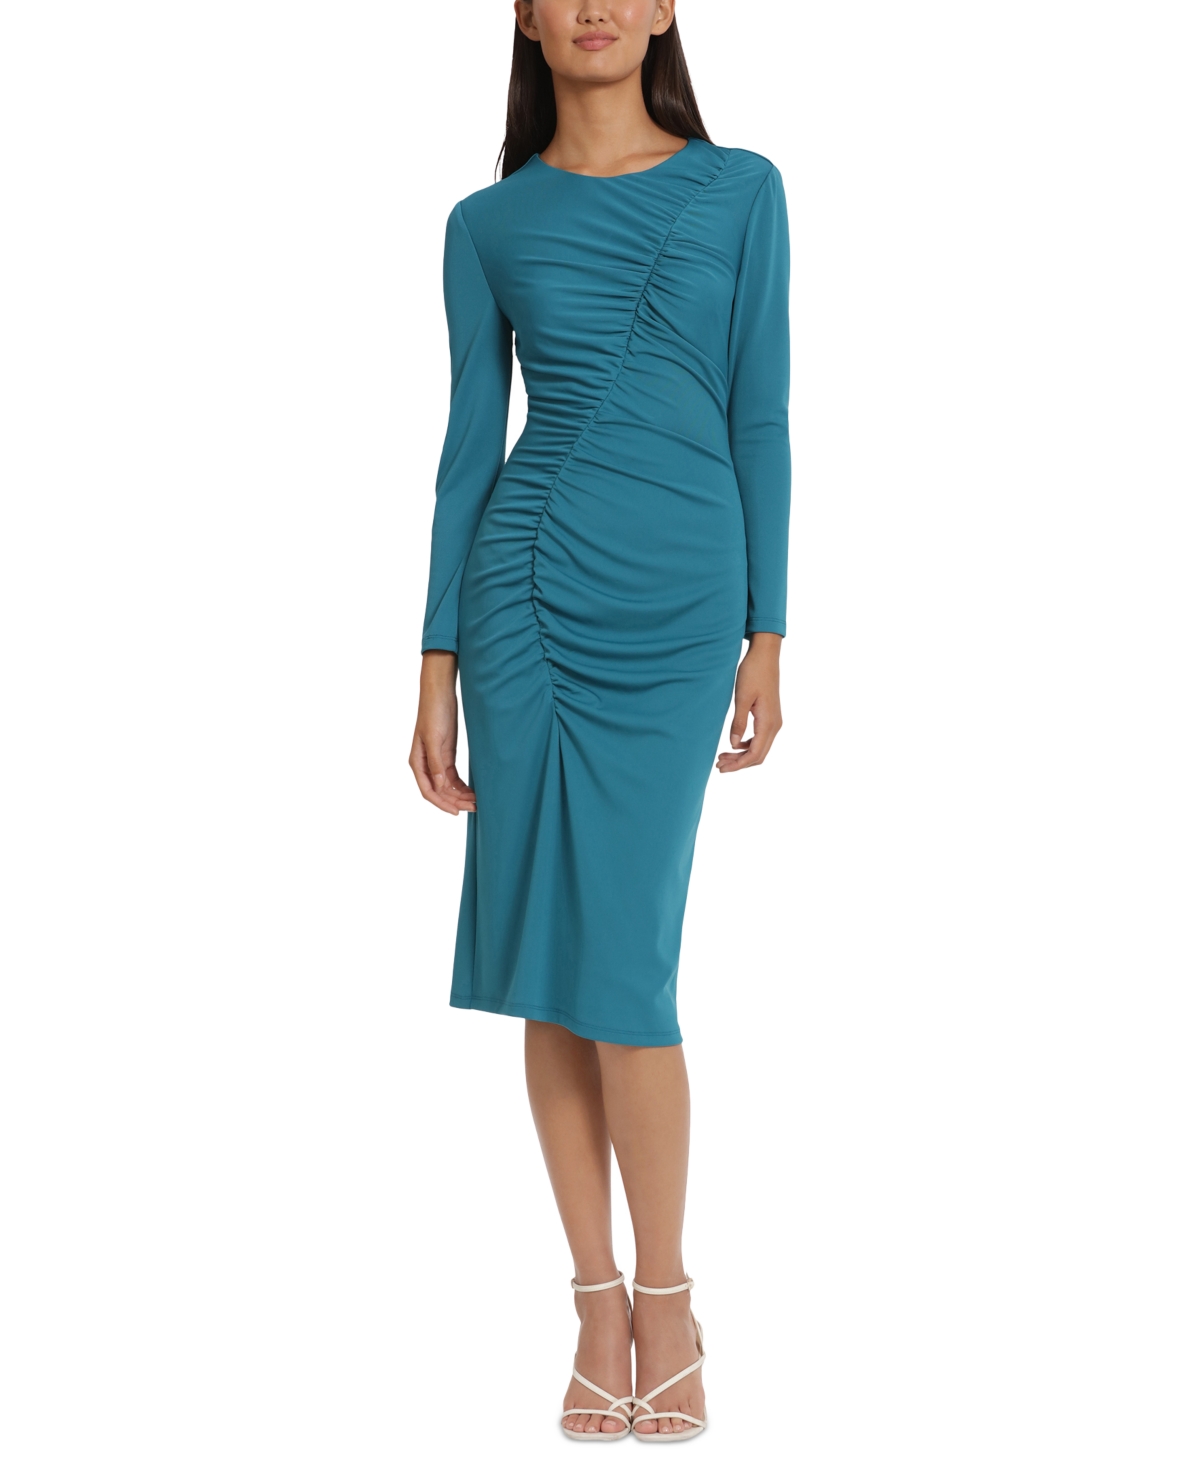 Women's Round-Neck Curved-Ruched Dress - Ocean